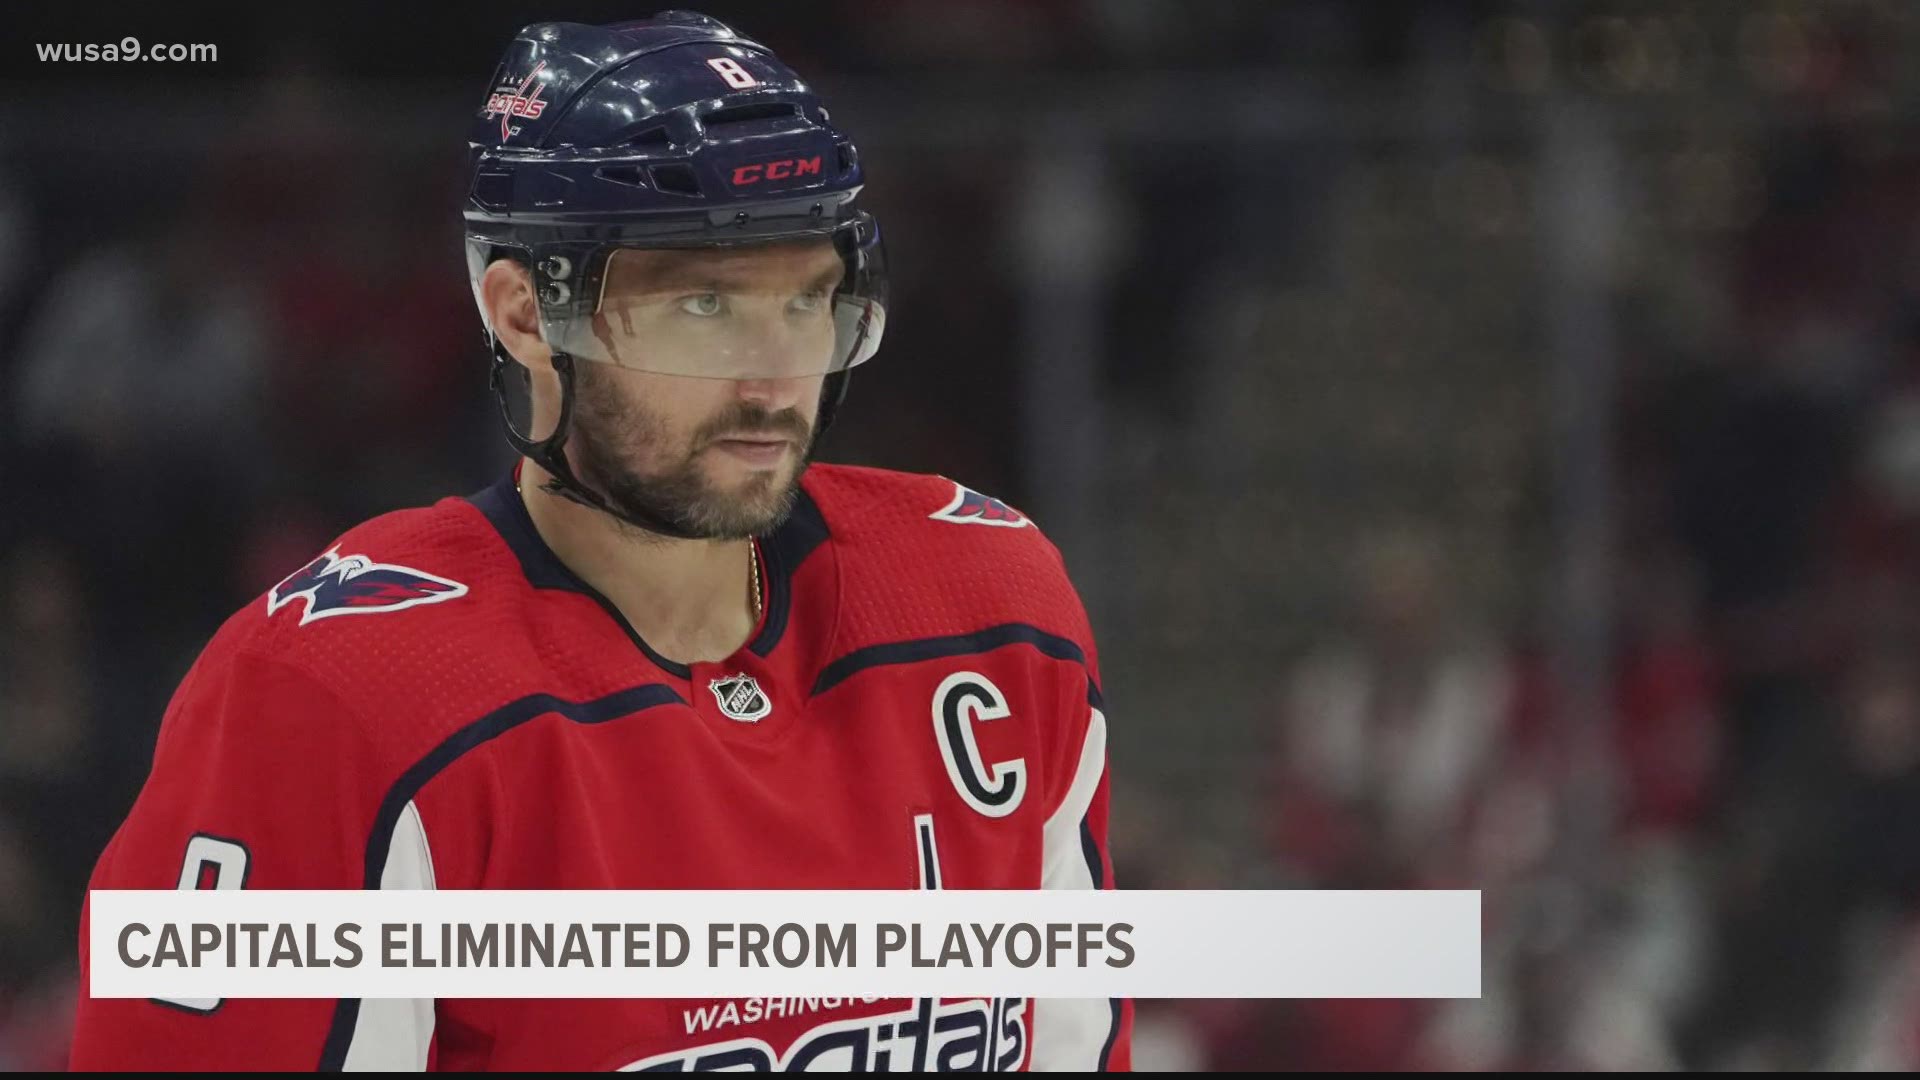 Alex Ovechkin to return Thursday for Washington Capitals after